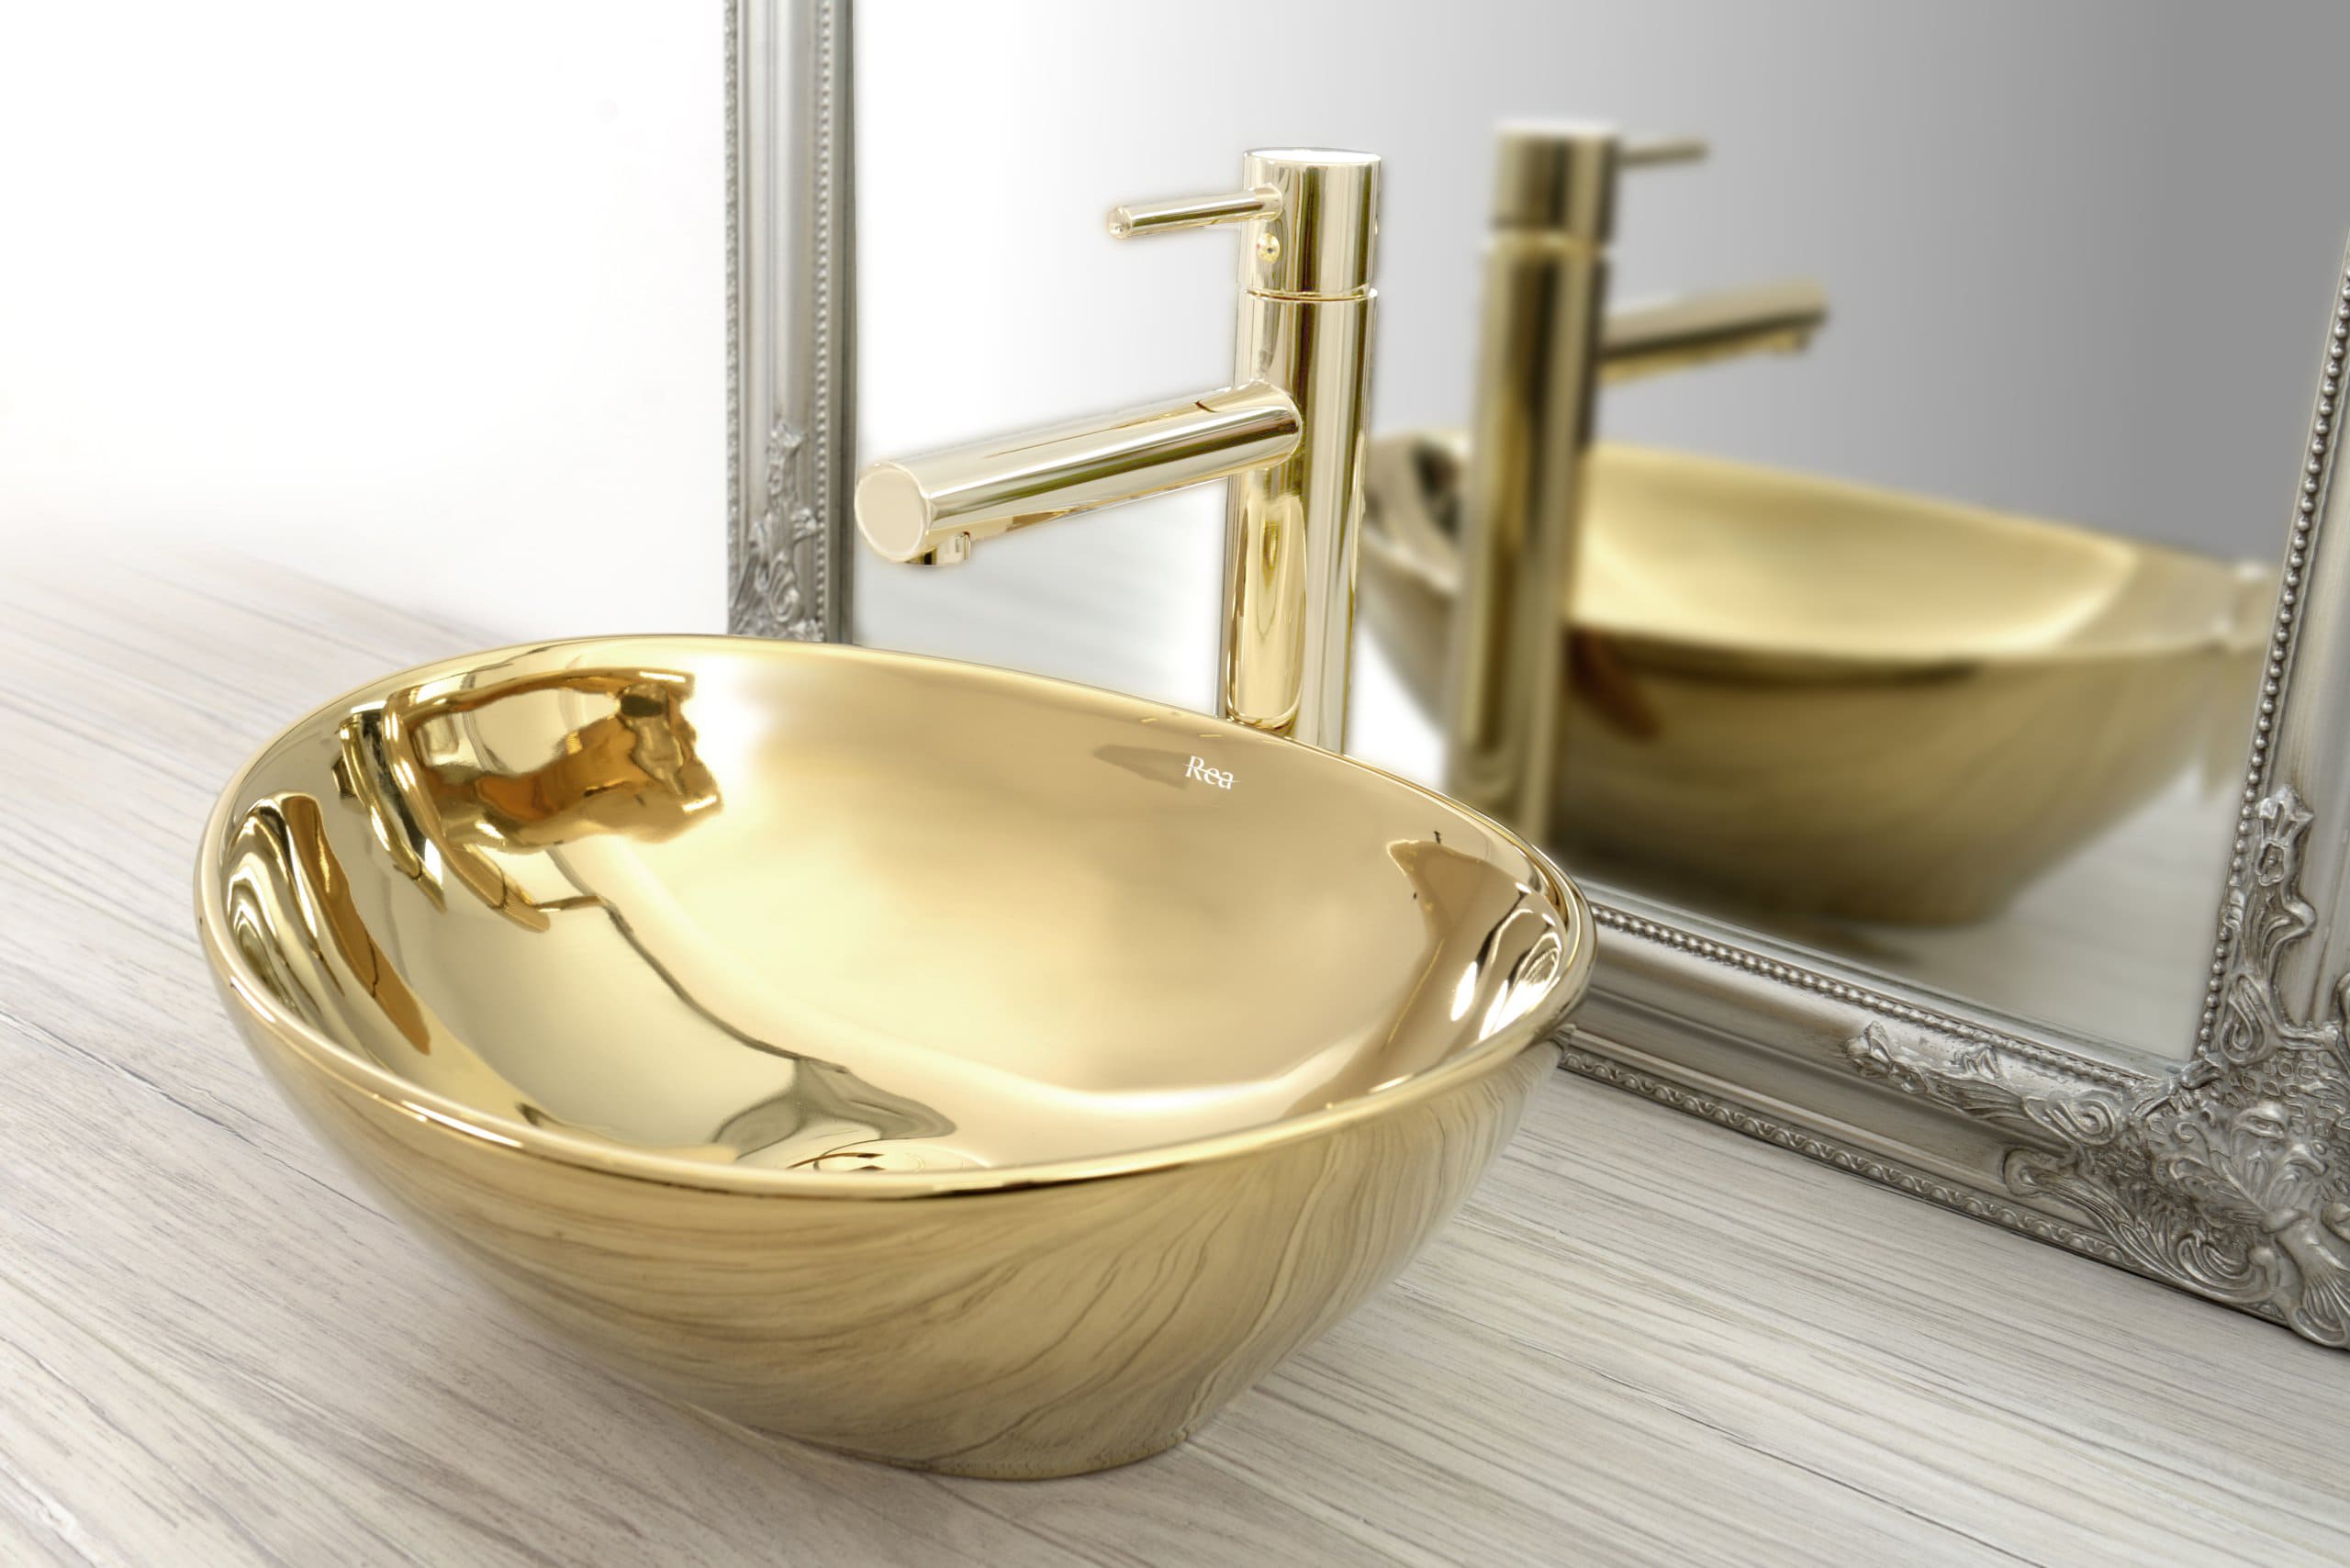 Tessie bright gold plated faucet 